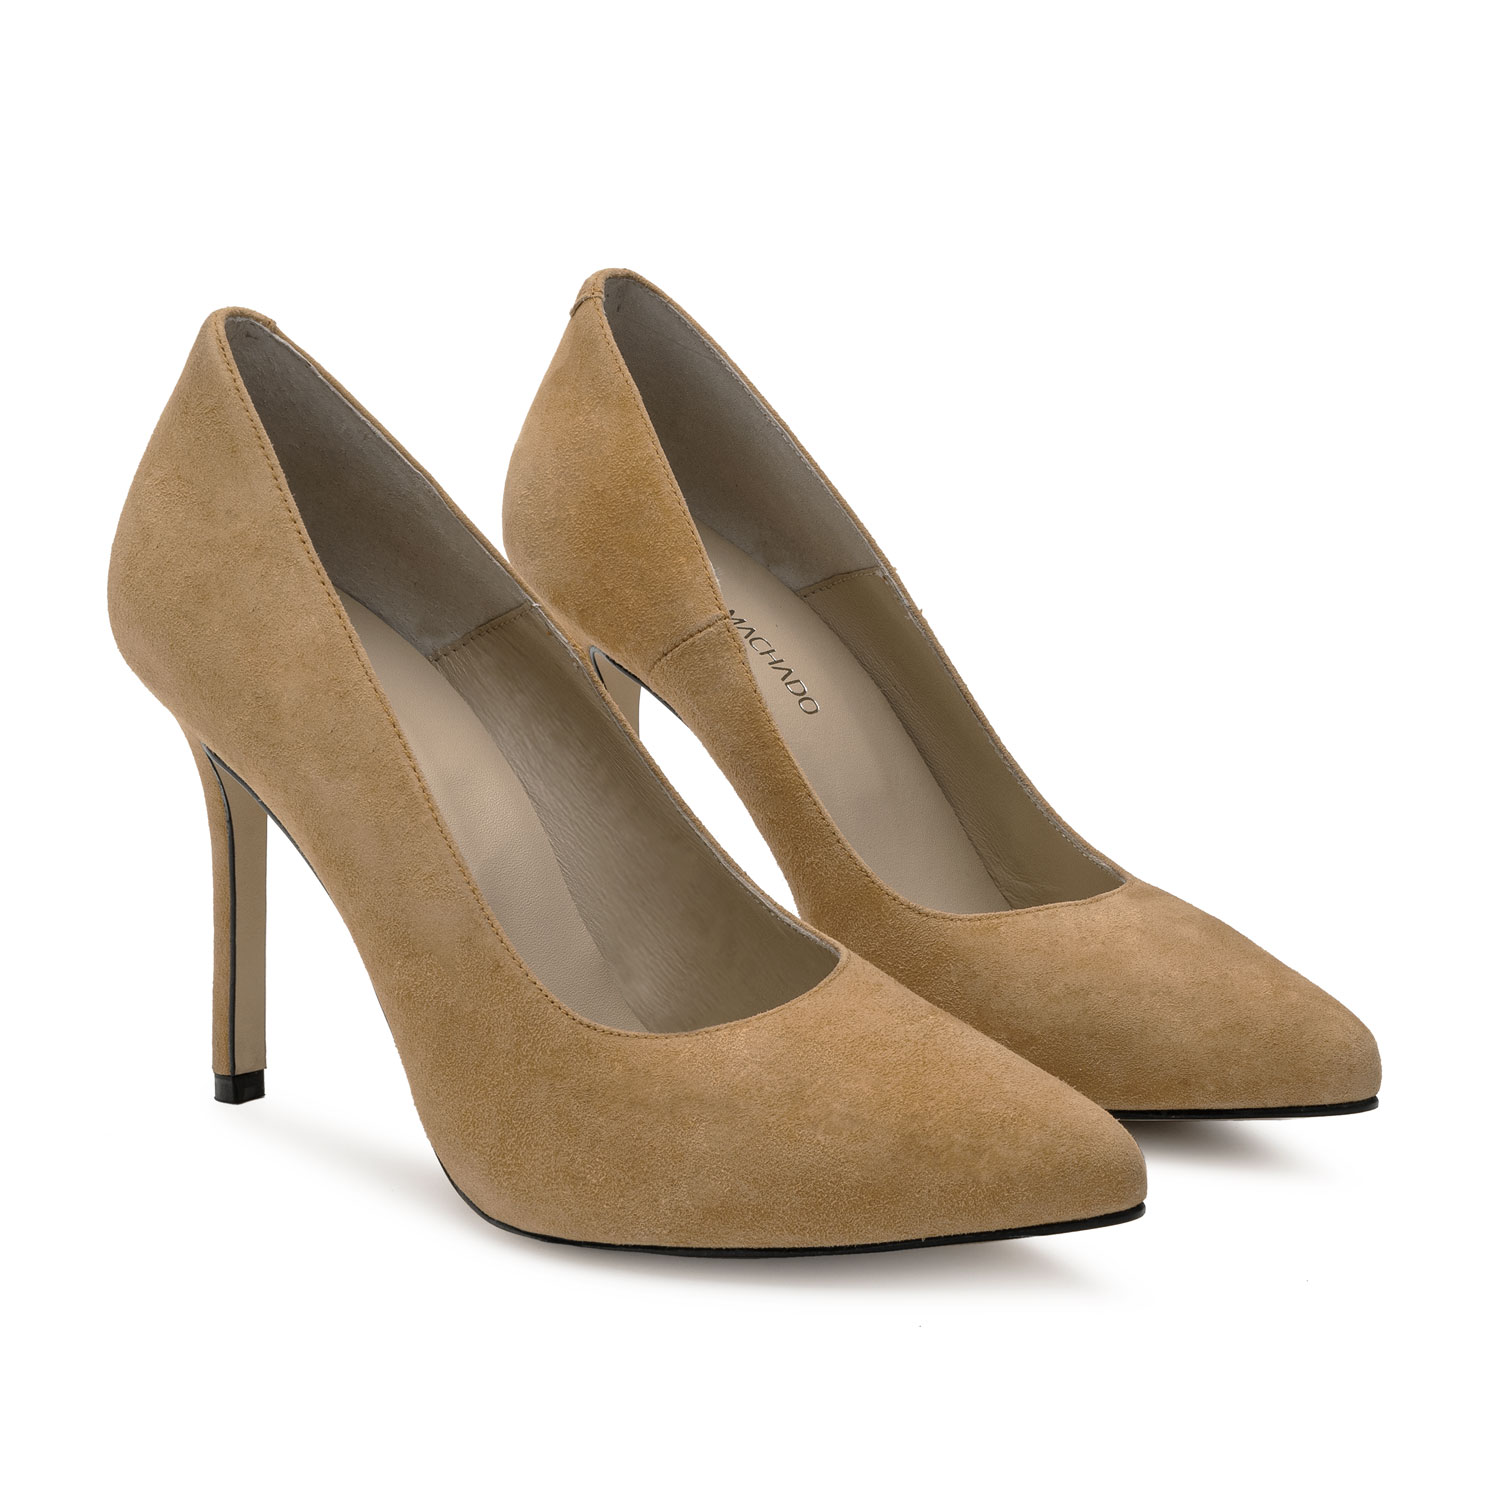 Heeled Shoes in Camel Suede 